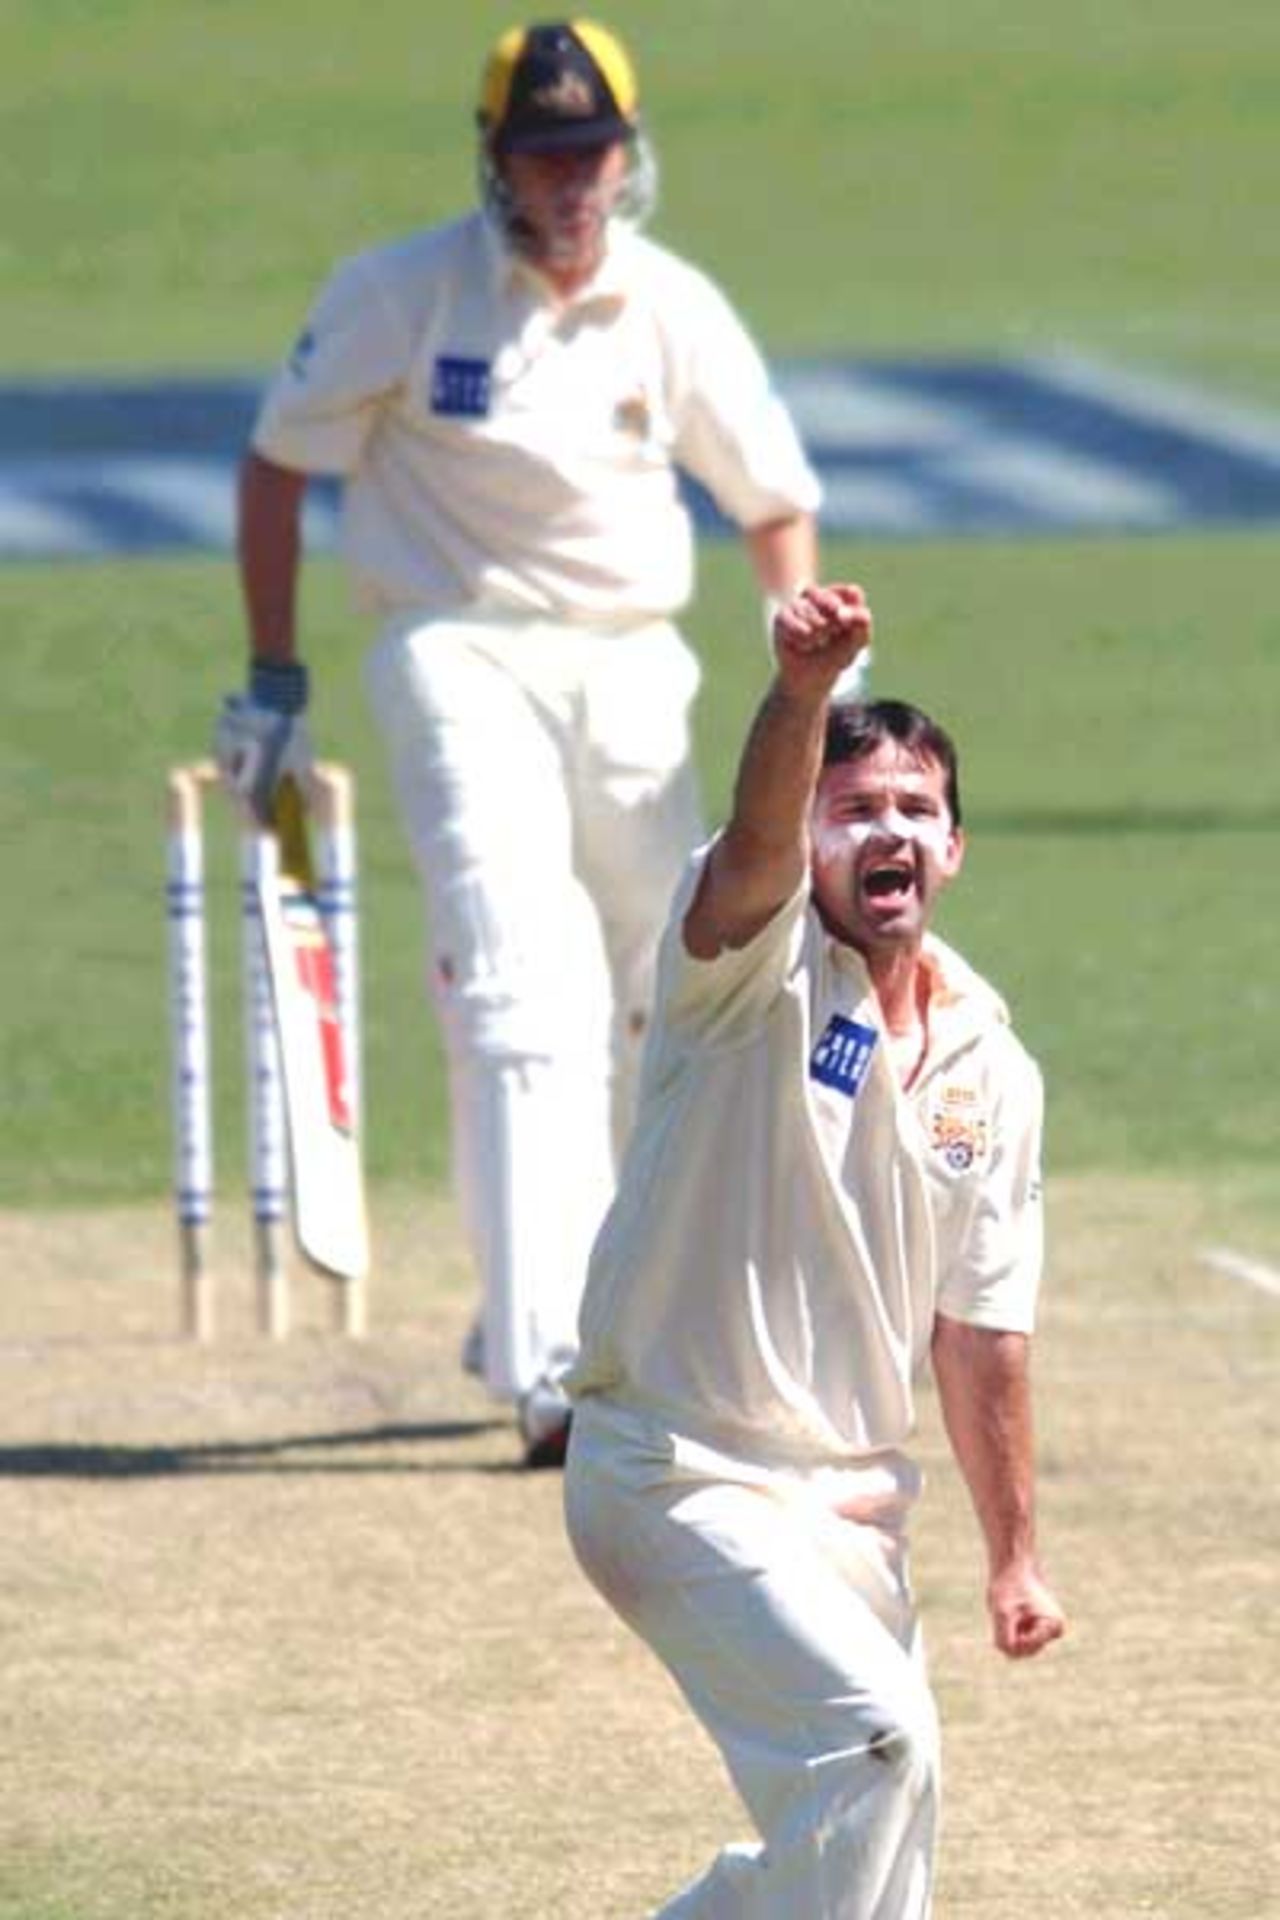 18 Oct 2001: Adam Dale of Queensland appeals unsuccessfully for the wicket of Marcus North of Western Australia during the Pura Cup cricket match between Queensland and Western Australia which is being played at the Gabba in Brisbane, Australia.